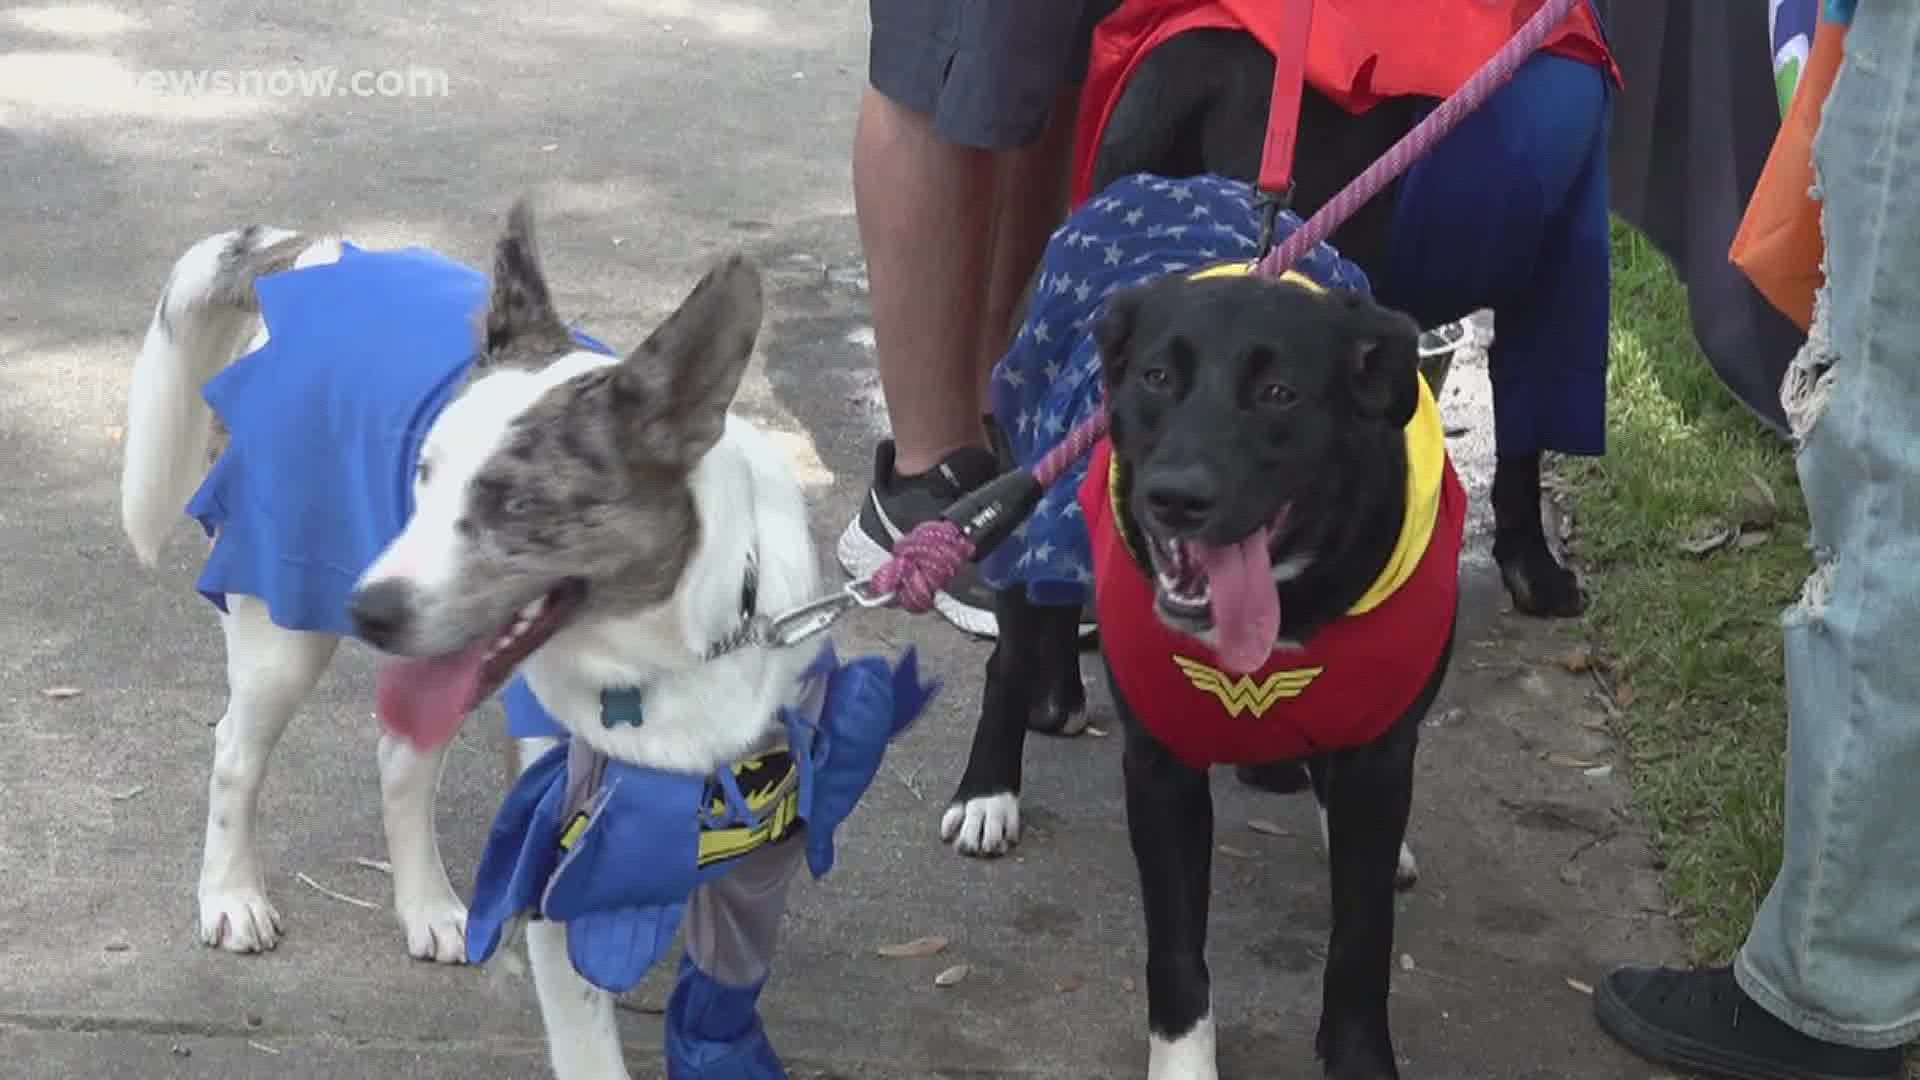 The family-fun event will have a "Strut Your Mutt" parade, paw readings, games for children and dogs to adopt, among other paw-some activities.